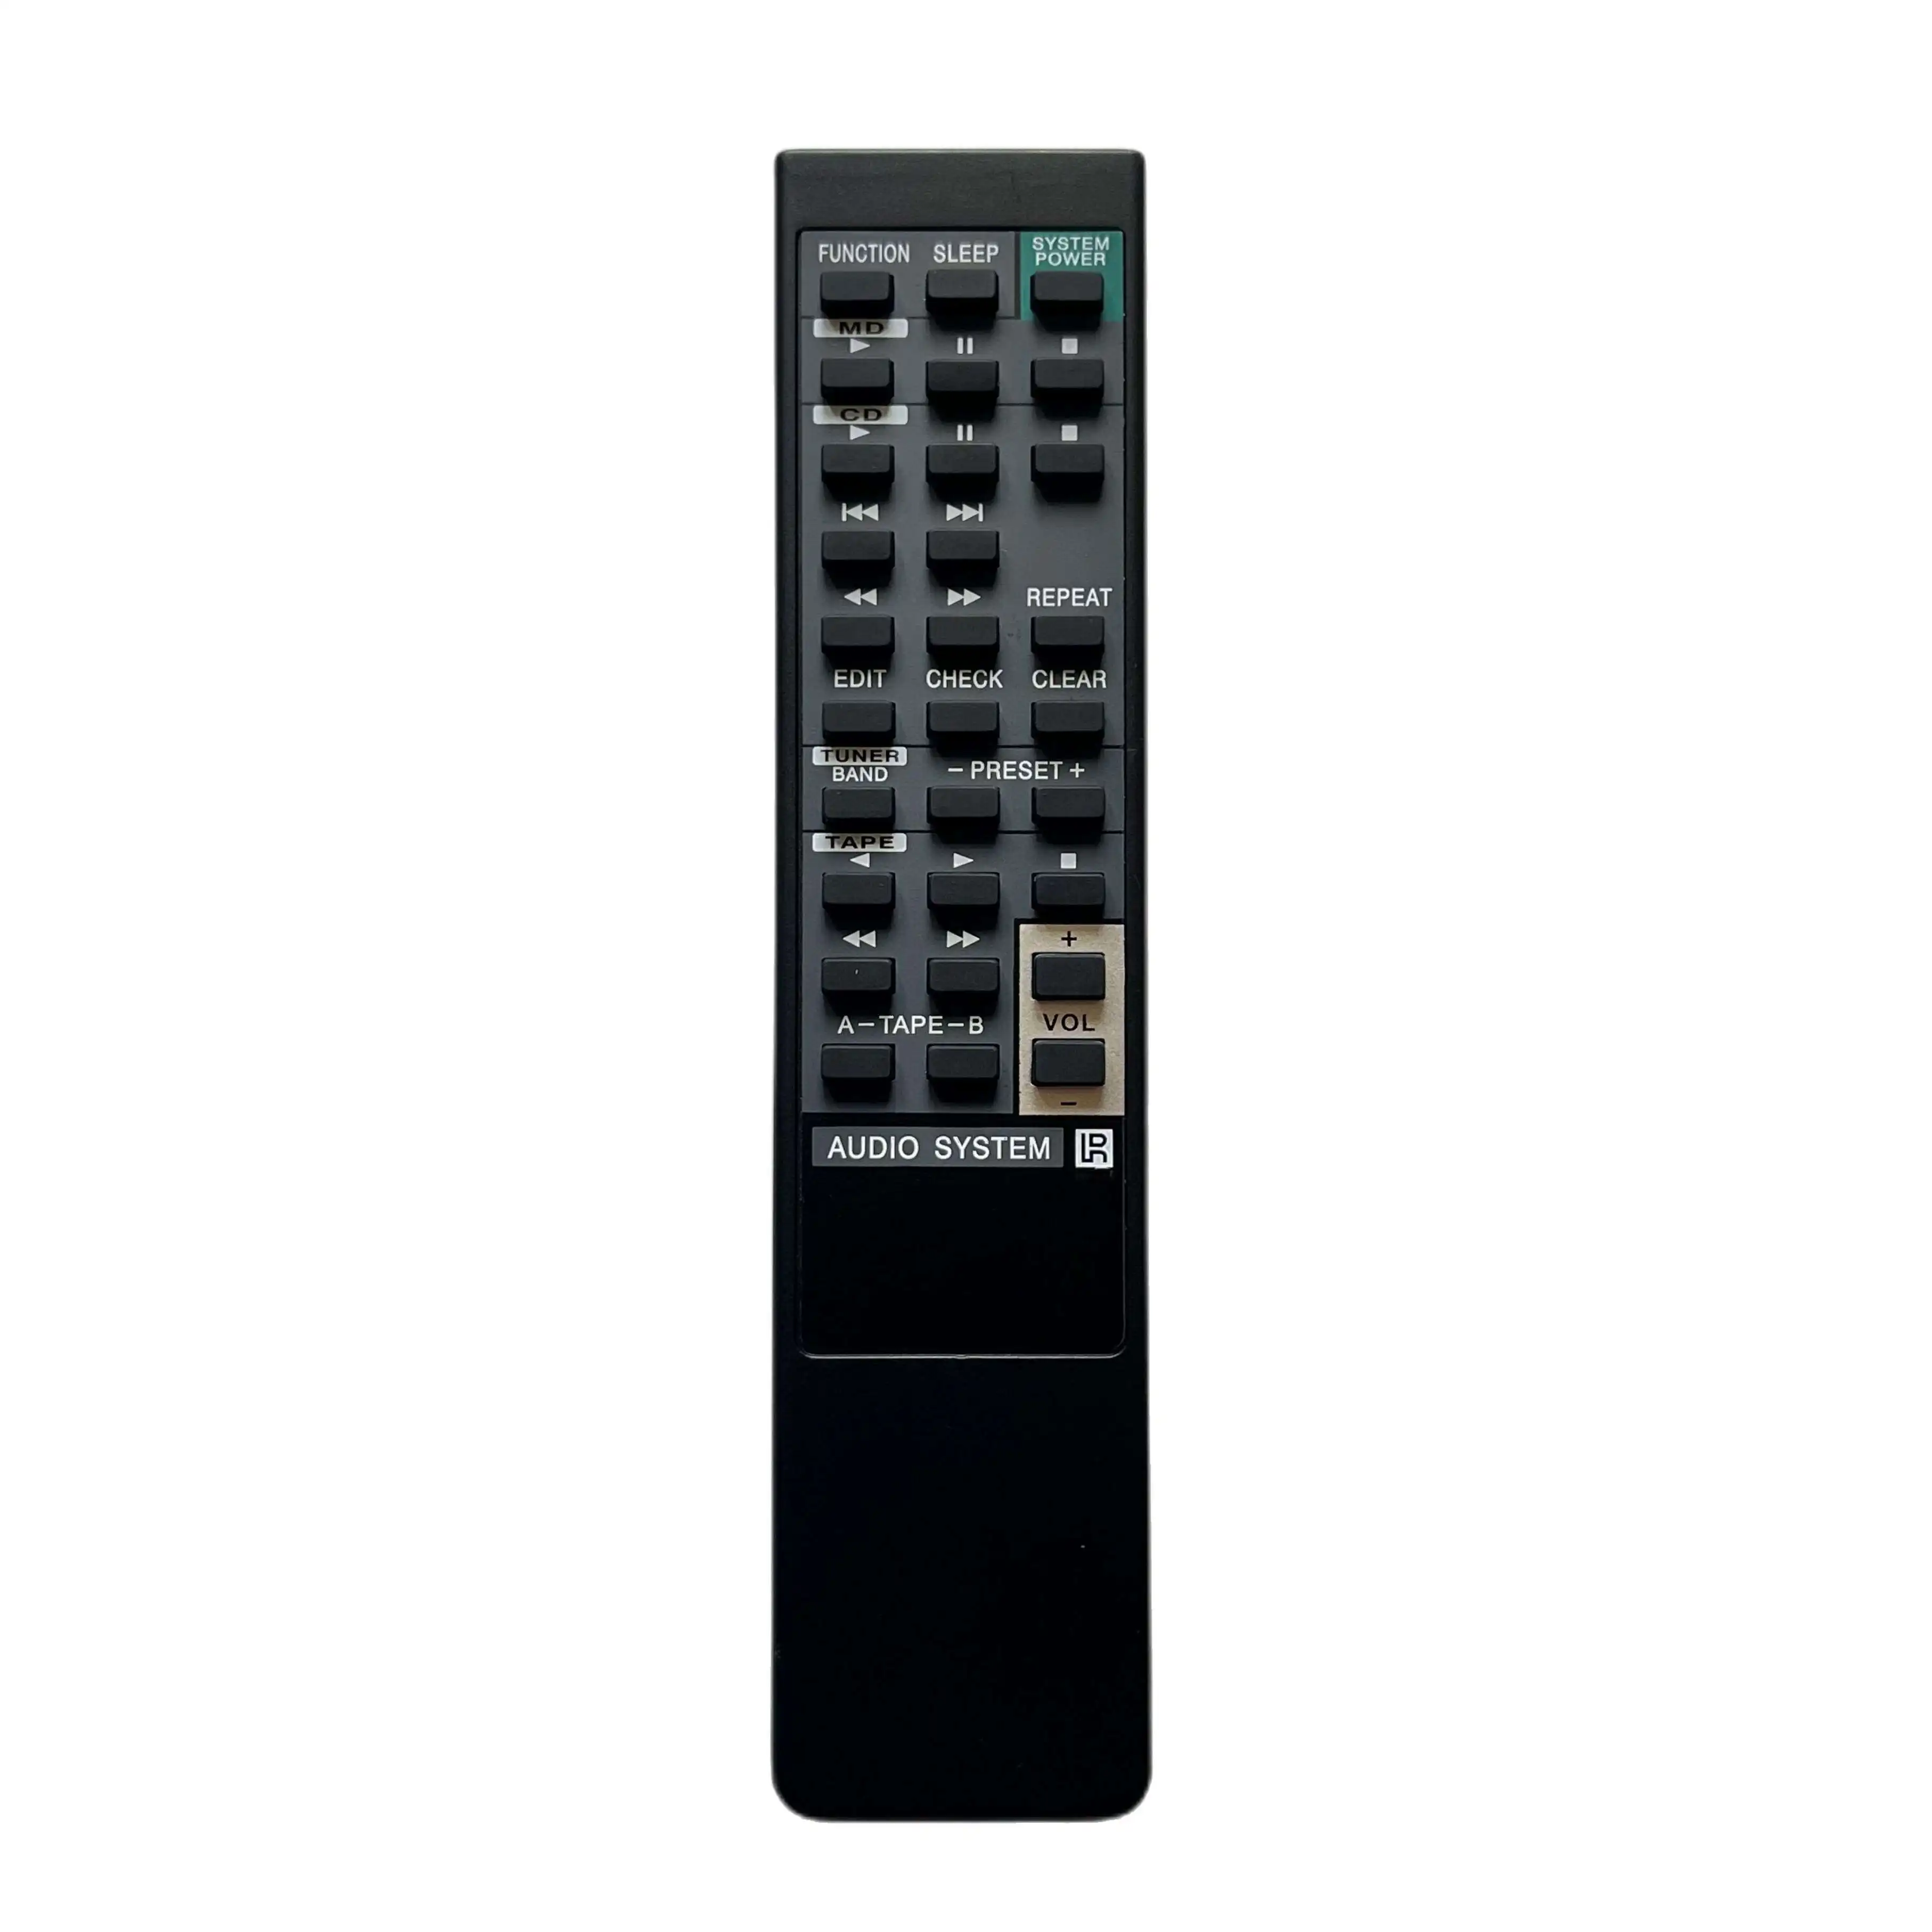 Receiver Remote Control for Sony Audio HCD-H801 SS-H801V FH-G80 HCD-H701 FH-G70 MHC-701 MHC-S300